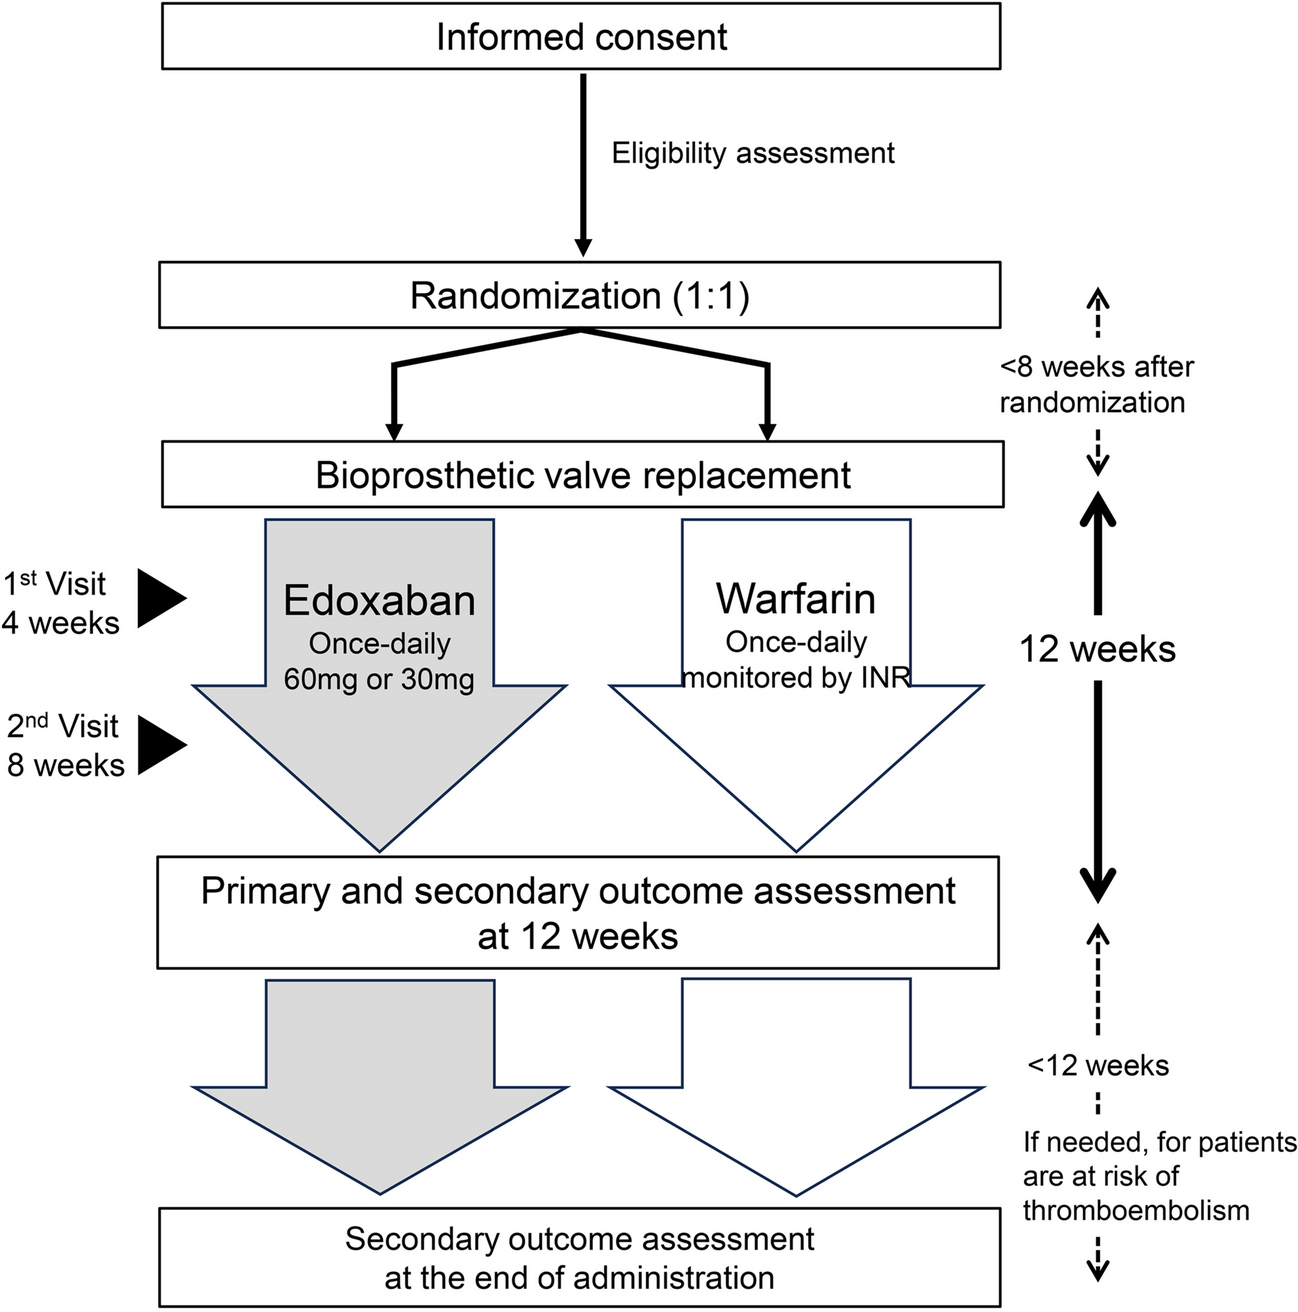 Efficacy and Safety of Edoxaban in Anticoagulant Therapy Early After Surgical Bioprosthetic Valve Replacement: Rationale and Design of the ENBALV Trial